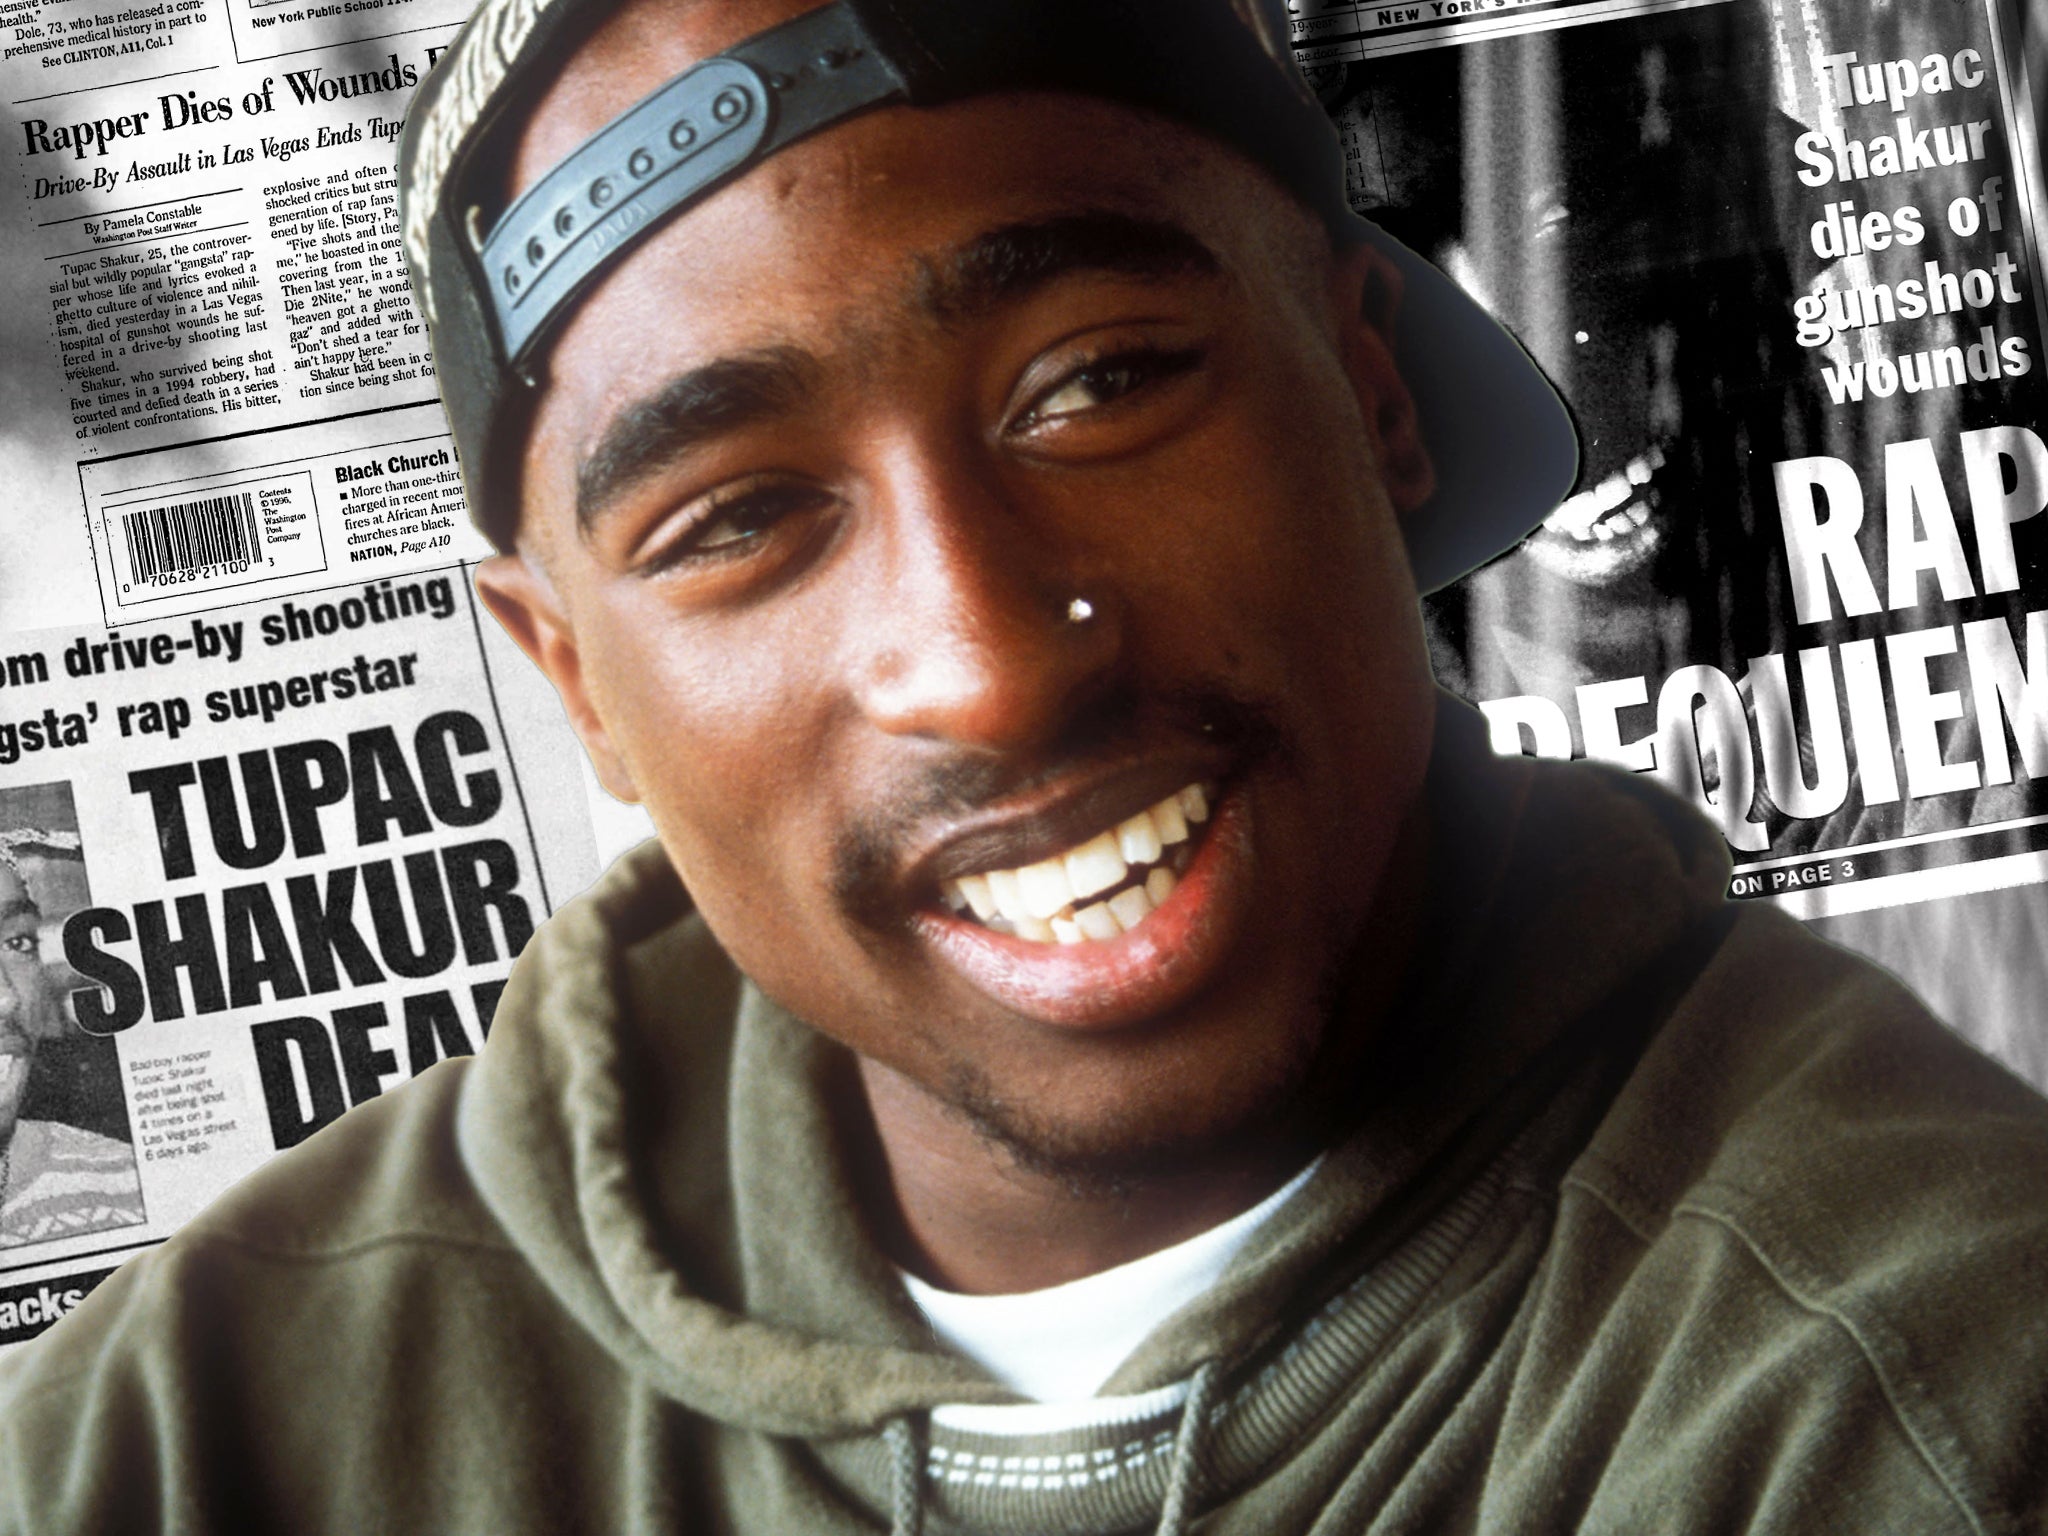 Tupac Shakur’s death remains unsolved to this day